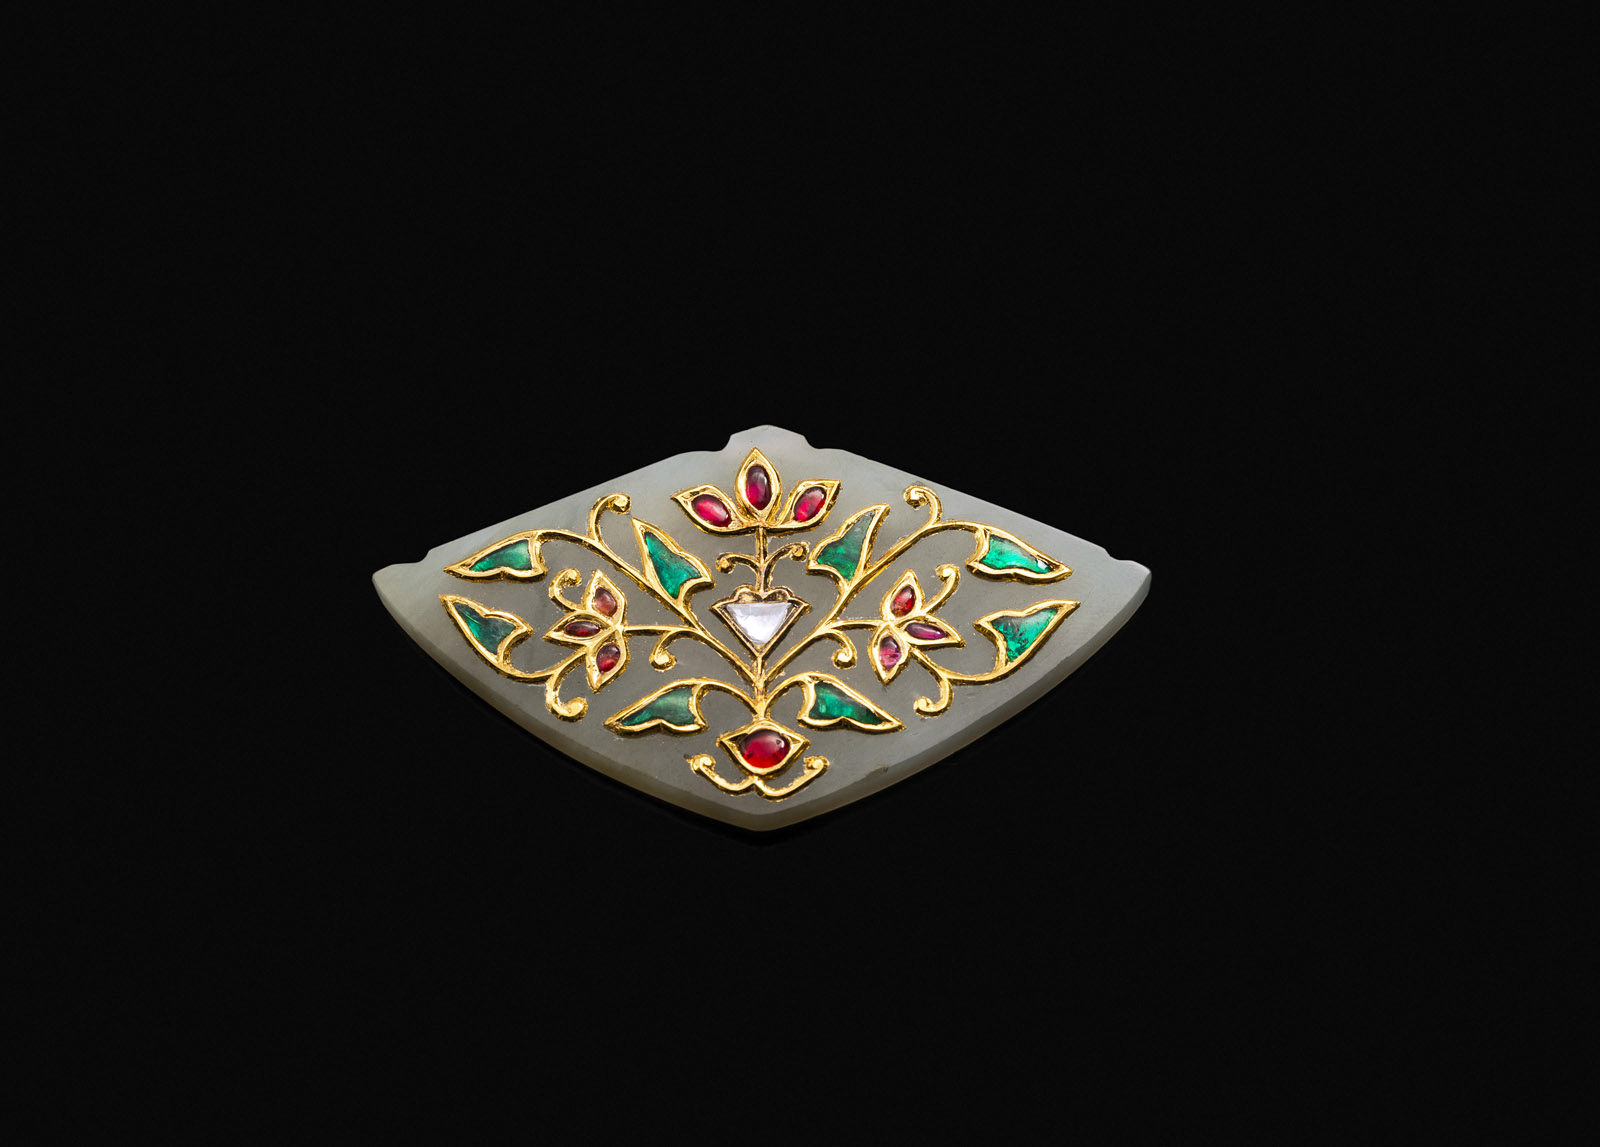 <b>A CARVED LIGHT GREEN JADE PENDANT DECORATED WITH GOLD, DIAMONDS, RUBIES AND EMERALDS IN MUGHAL STYLE</b>